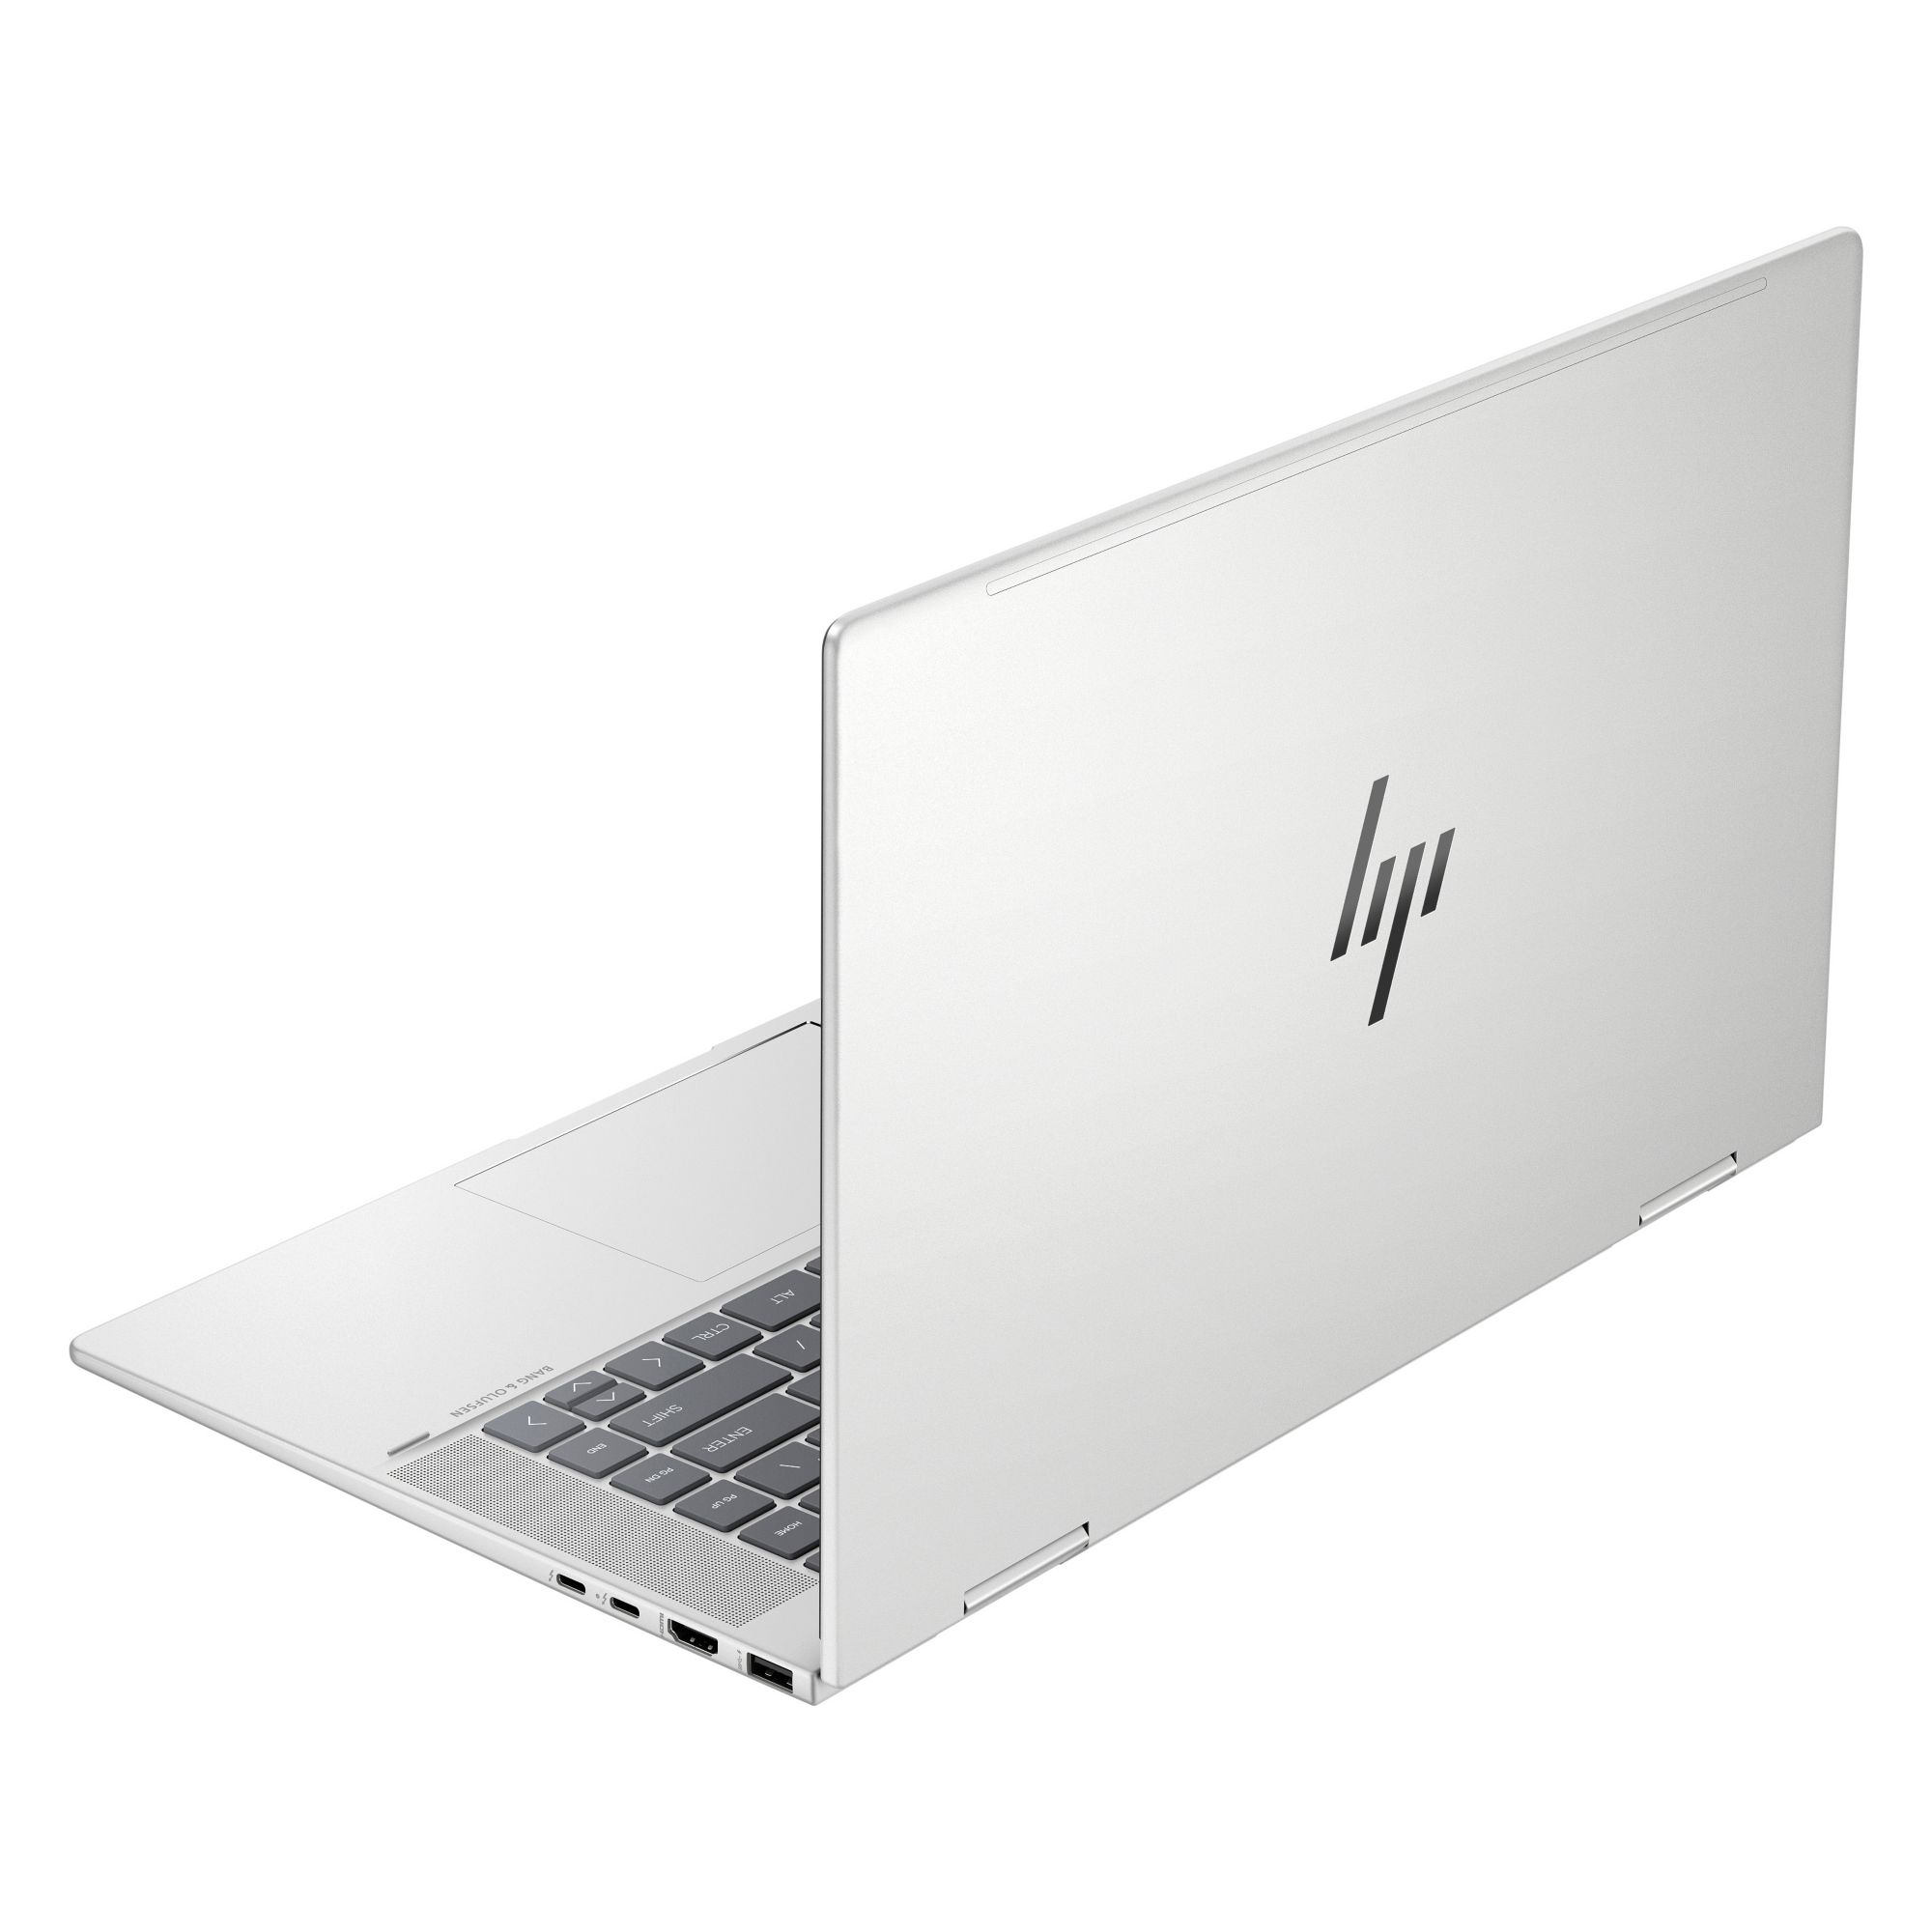 HP ENVY x360 15.6 FHD IPS 2-in-1 Touchscreen Notebook | BJ's Wholesale Club